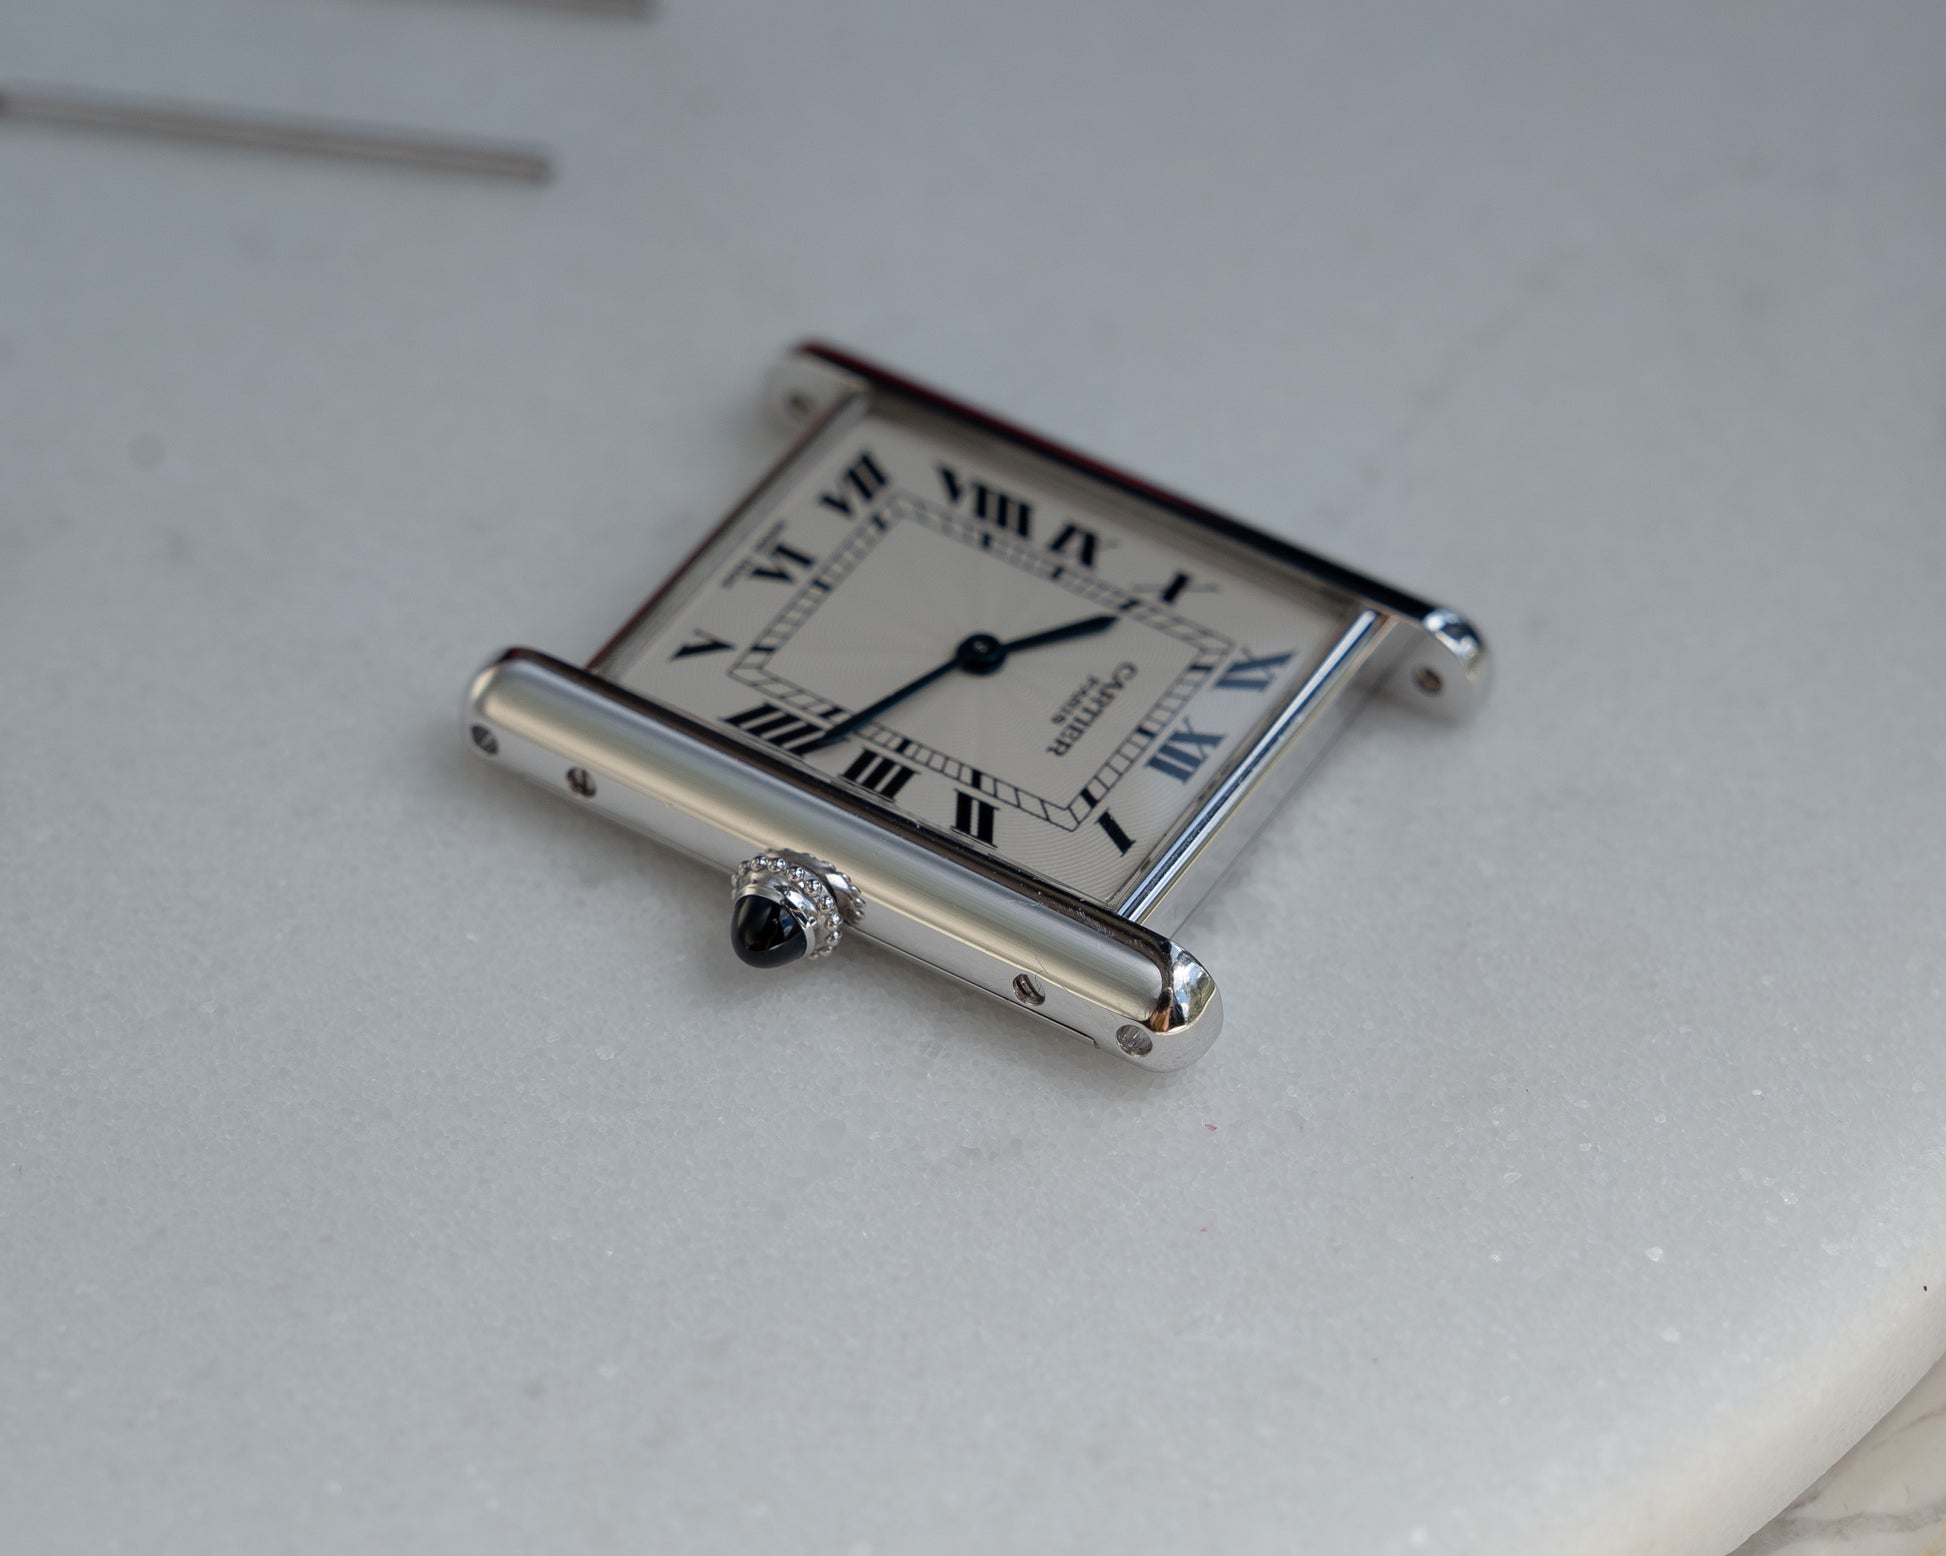 Cartier Tank Louis in platinum from the CPCP collection - full set –  Special Dial